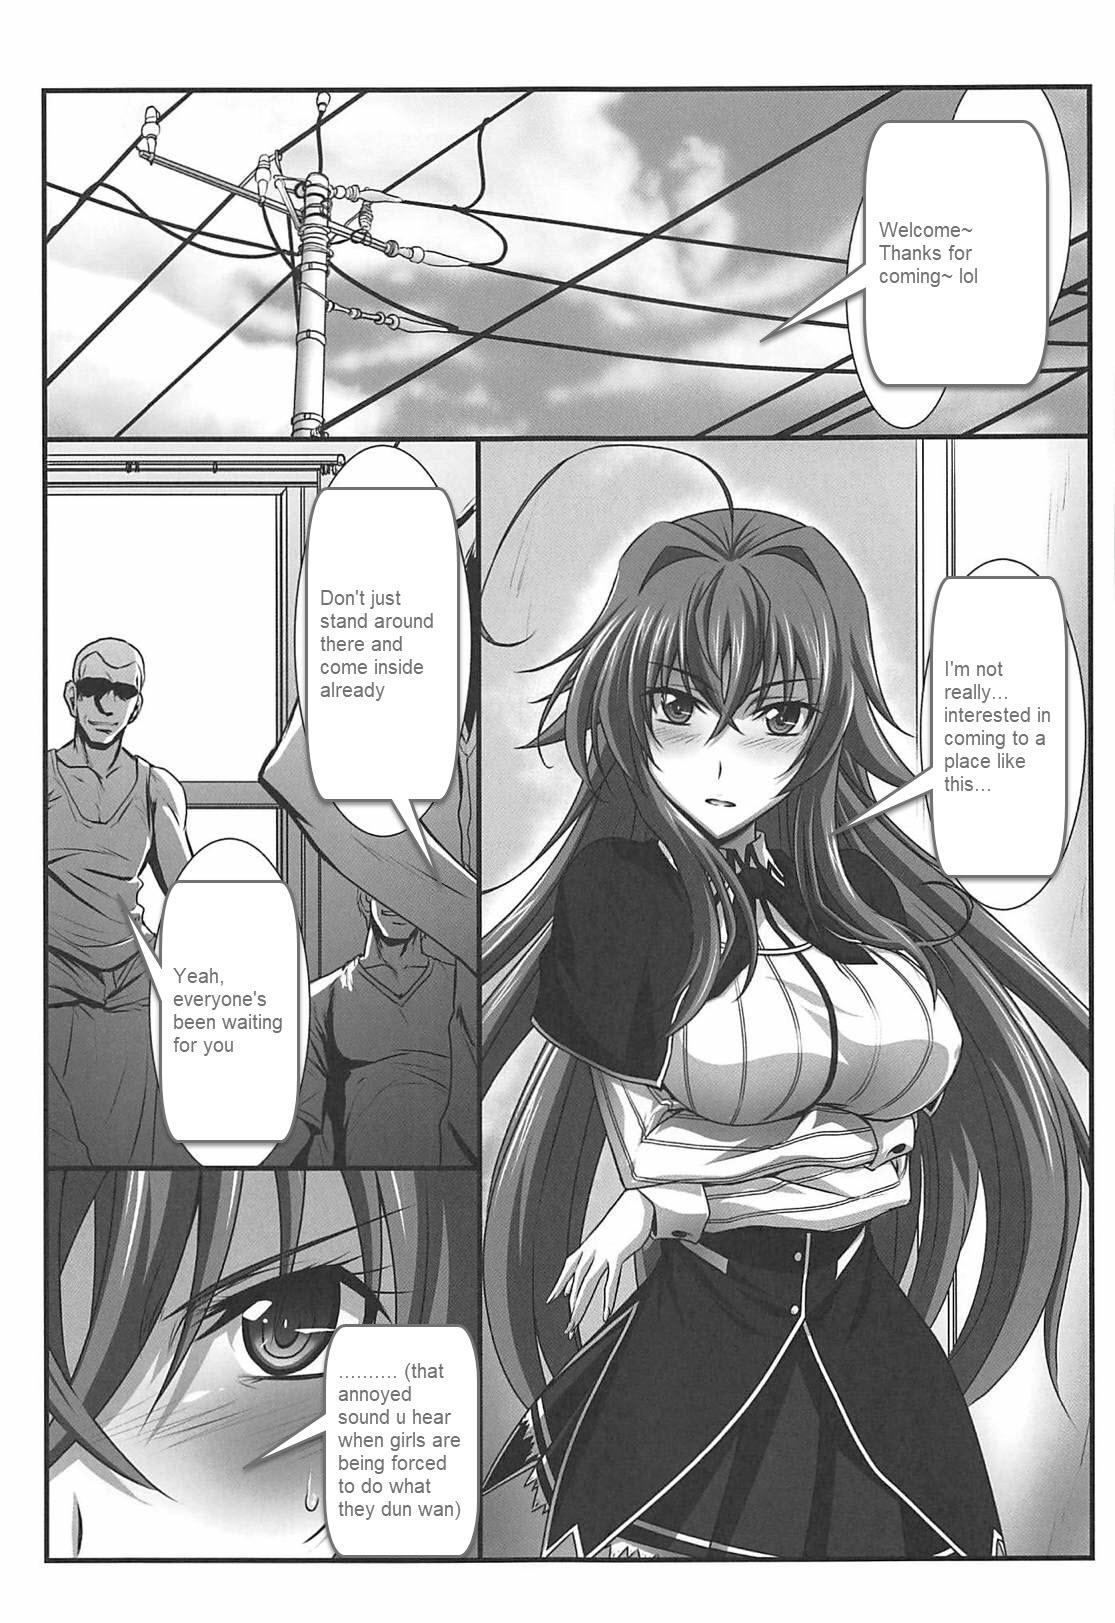 Outdoors SPIRAL ZONE DxD II - Highschool dxd Mofos - Page 4